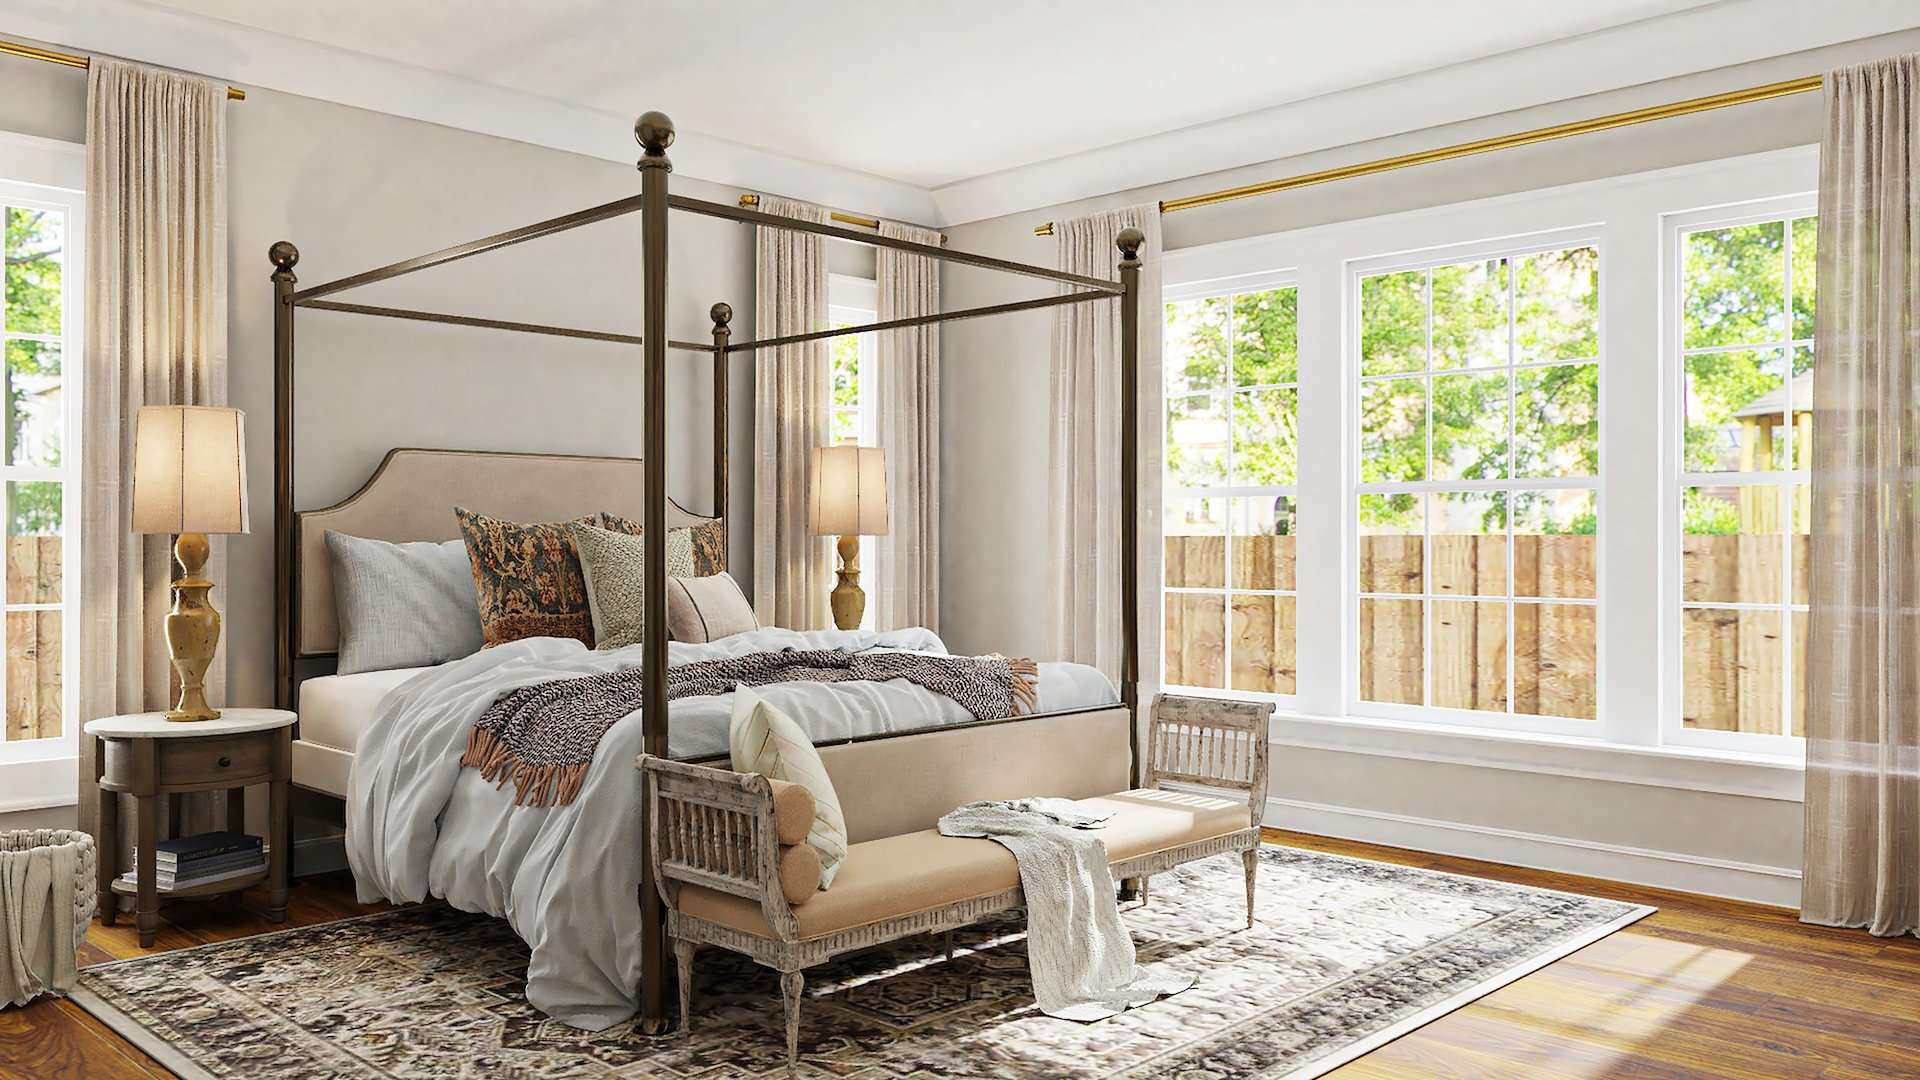 This guest room design uses white and tan colors in the poster bed’s bedding and the rug to create a warmer atmosphere.